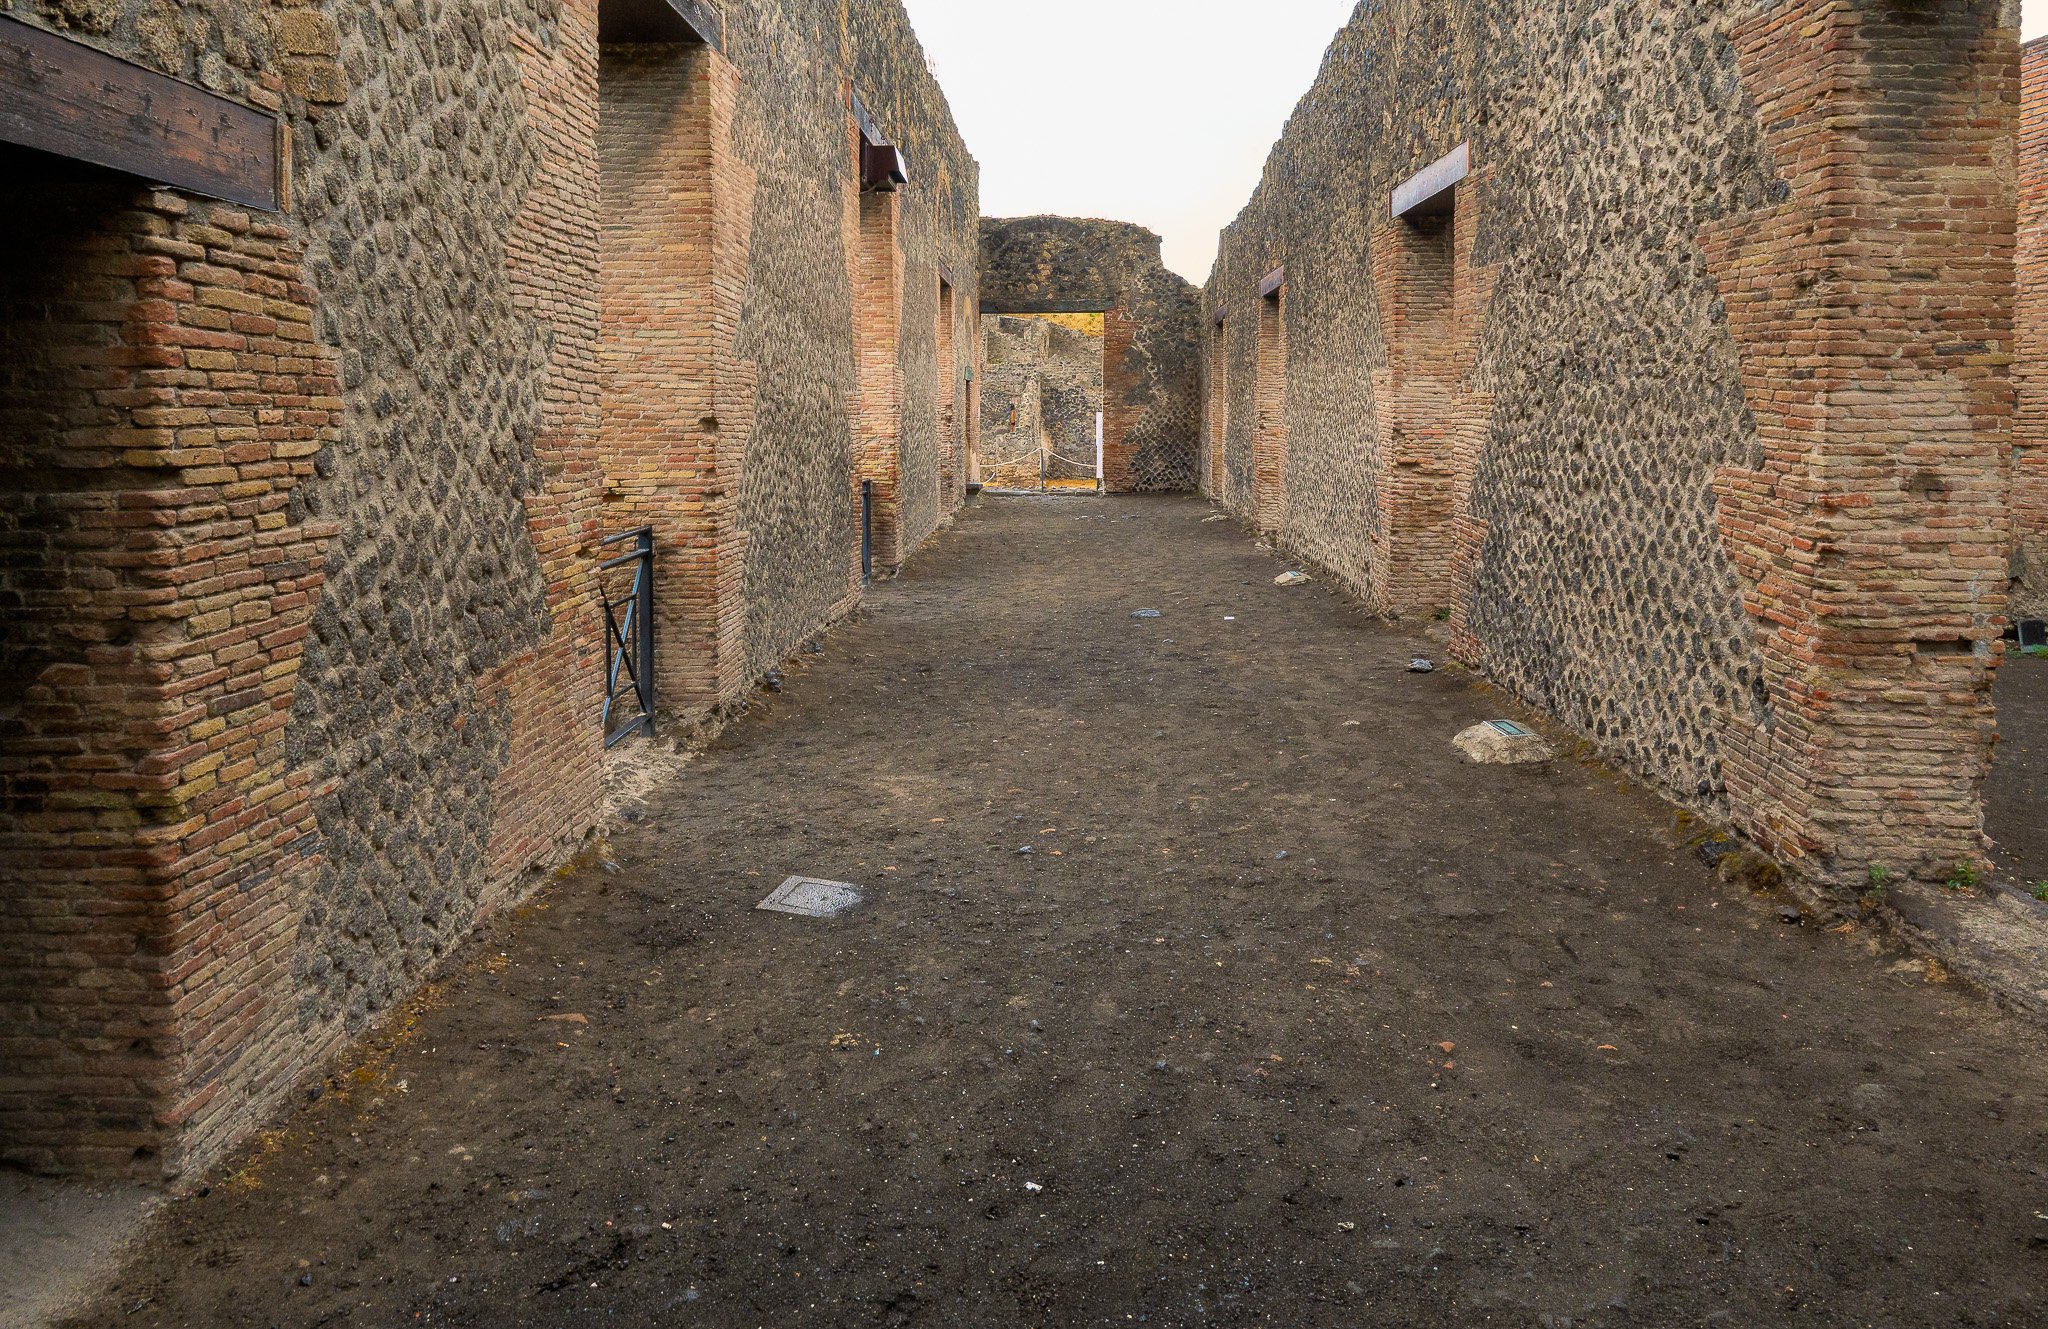 Business and living areas of Pompeii